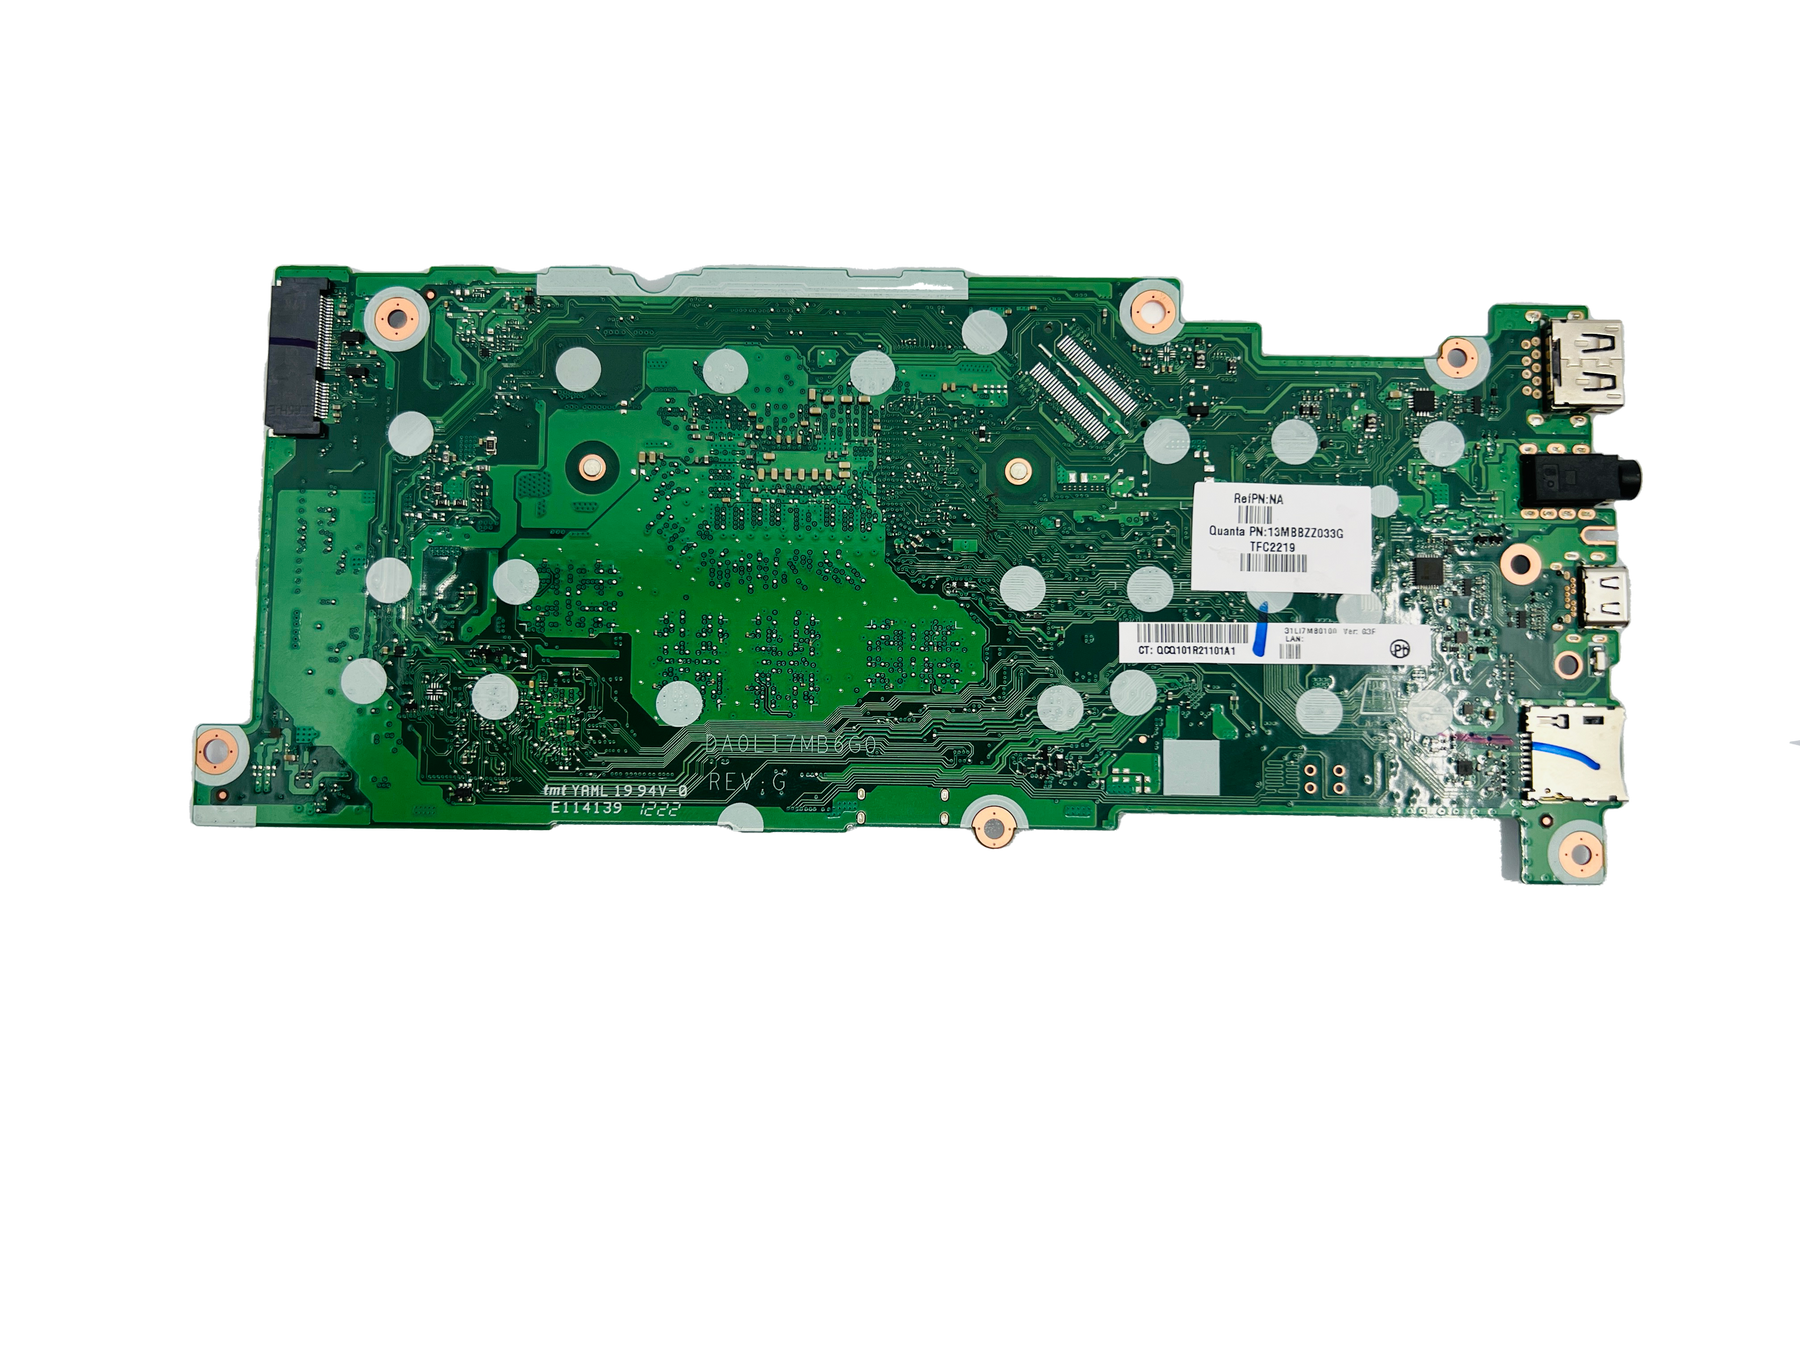 Renewed Replacement Mainboard for the CTL Chromebook NL72 (8/64)